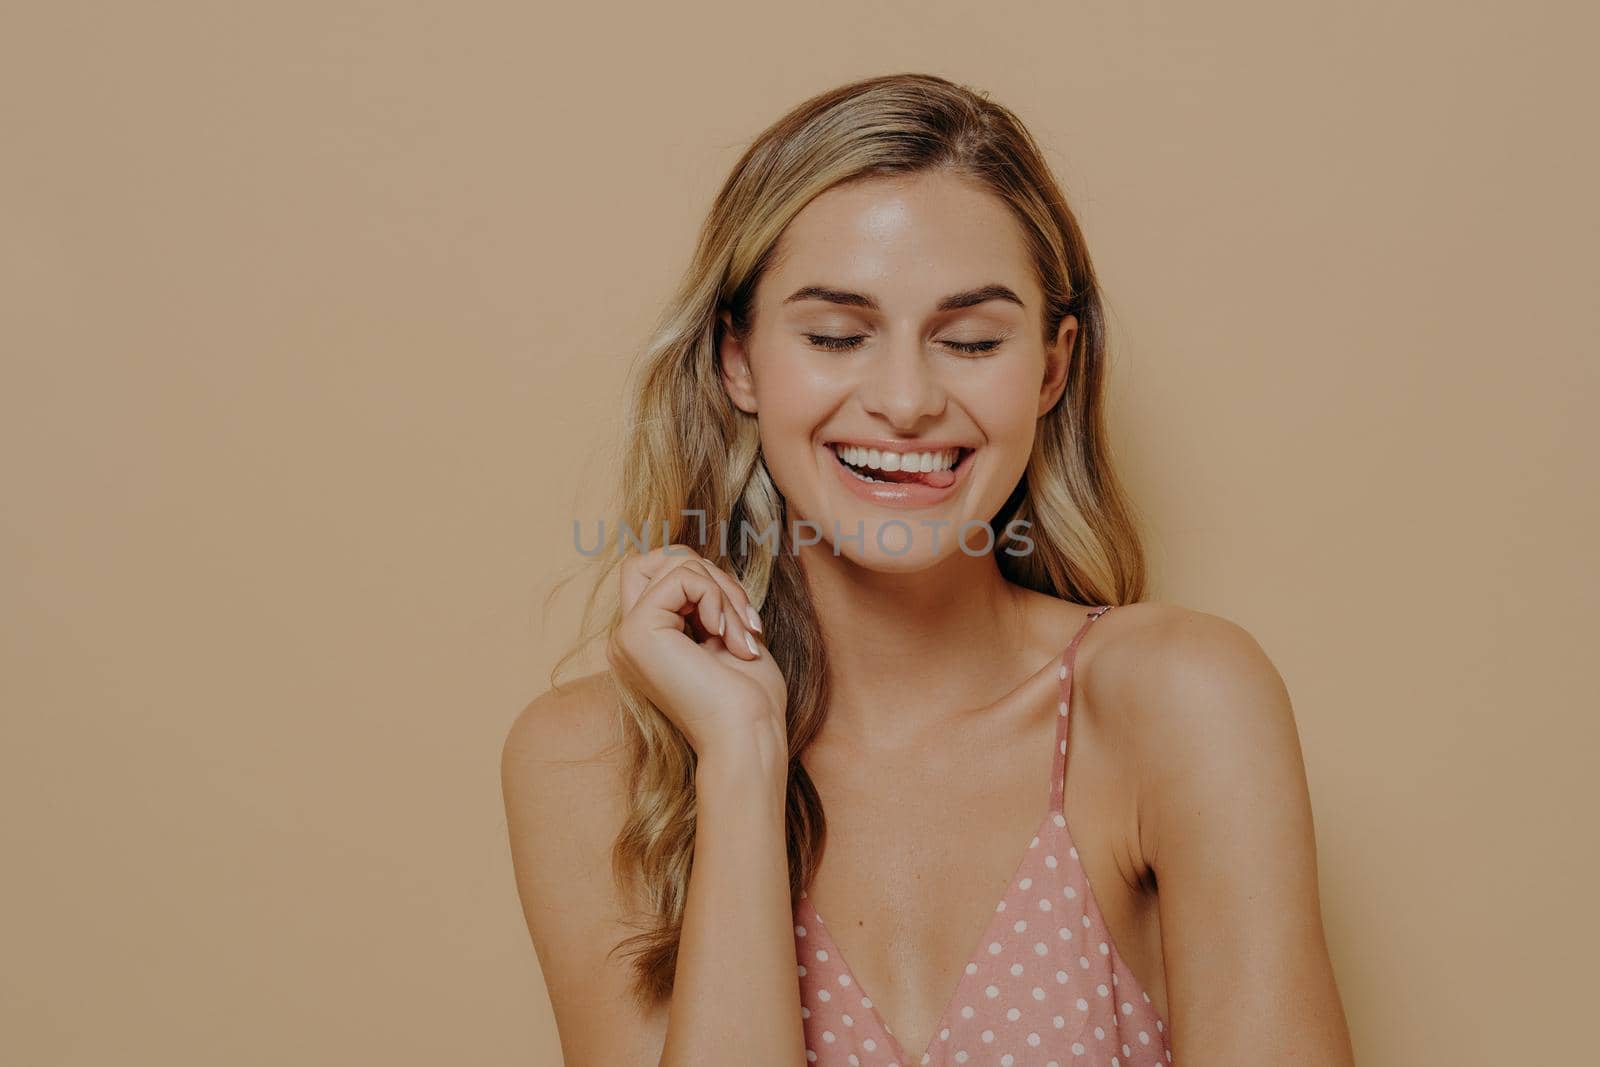 Human face expressions. Joyful cheerful young beautiful woman with fair wavy hair in polka dot pink summer dress laughing at joke, smiling broadly with closed eyes. Positive emotions concept